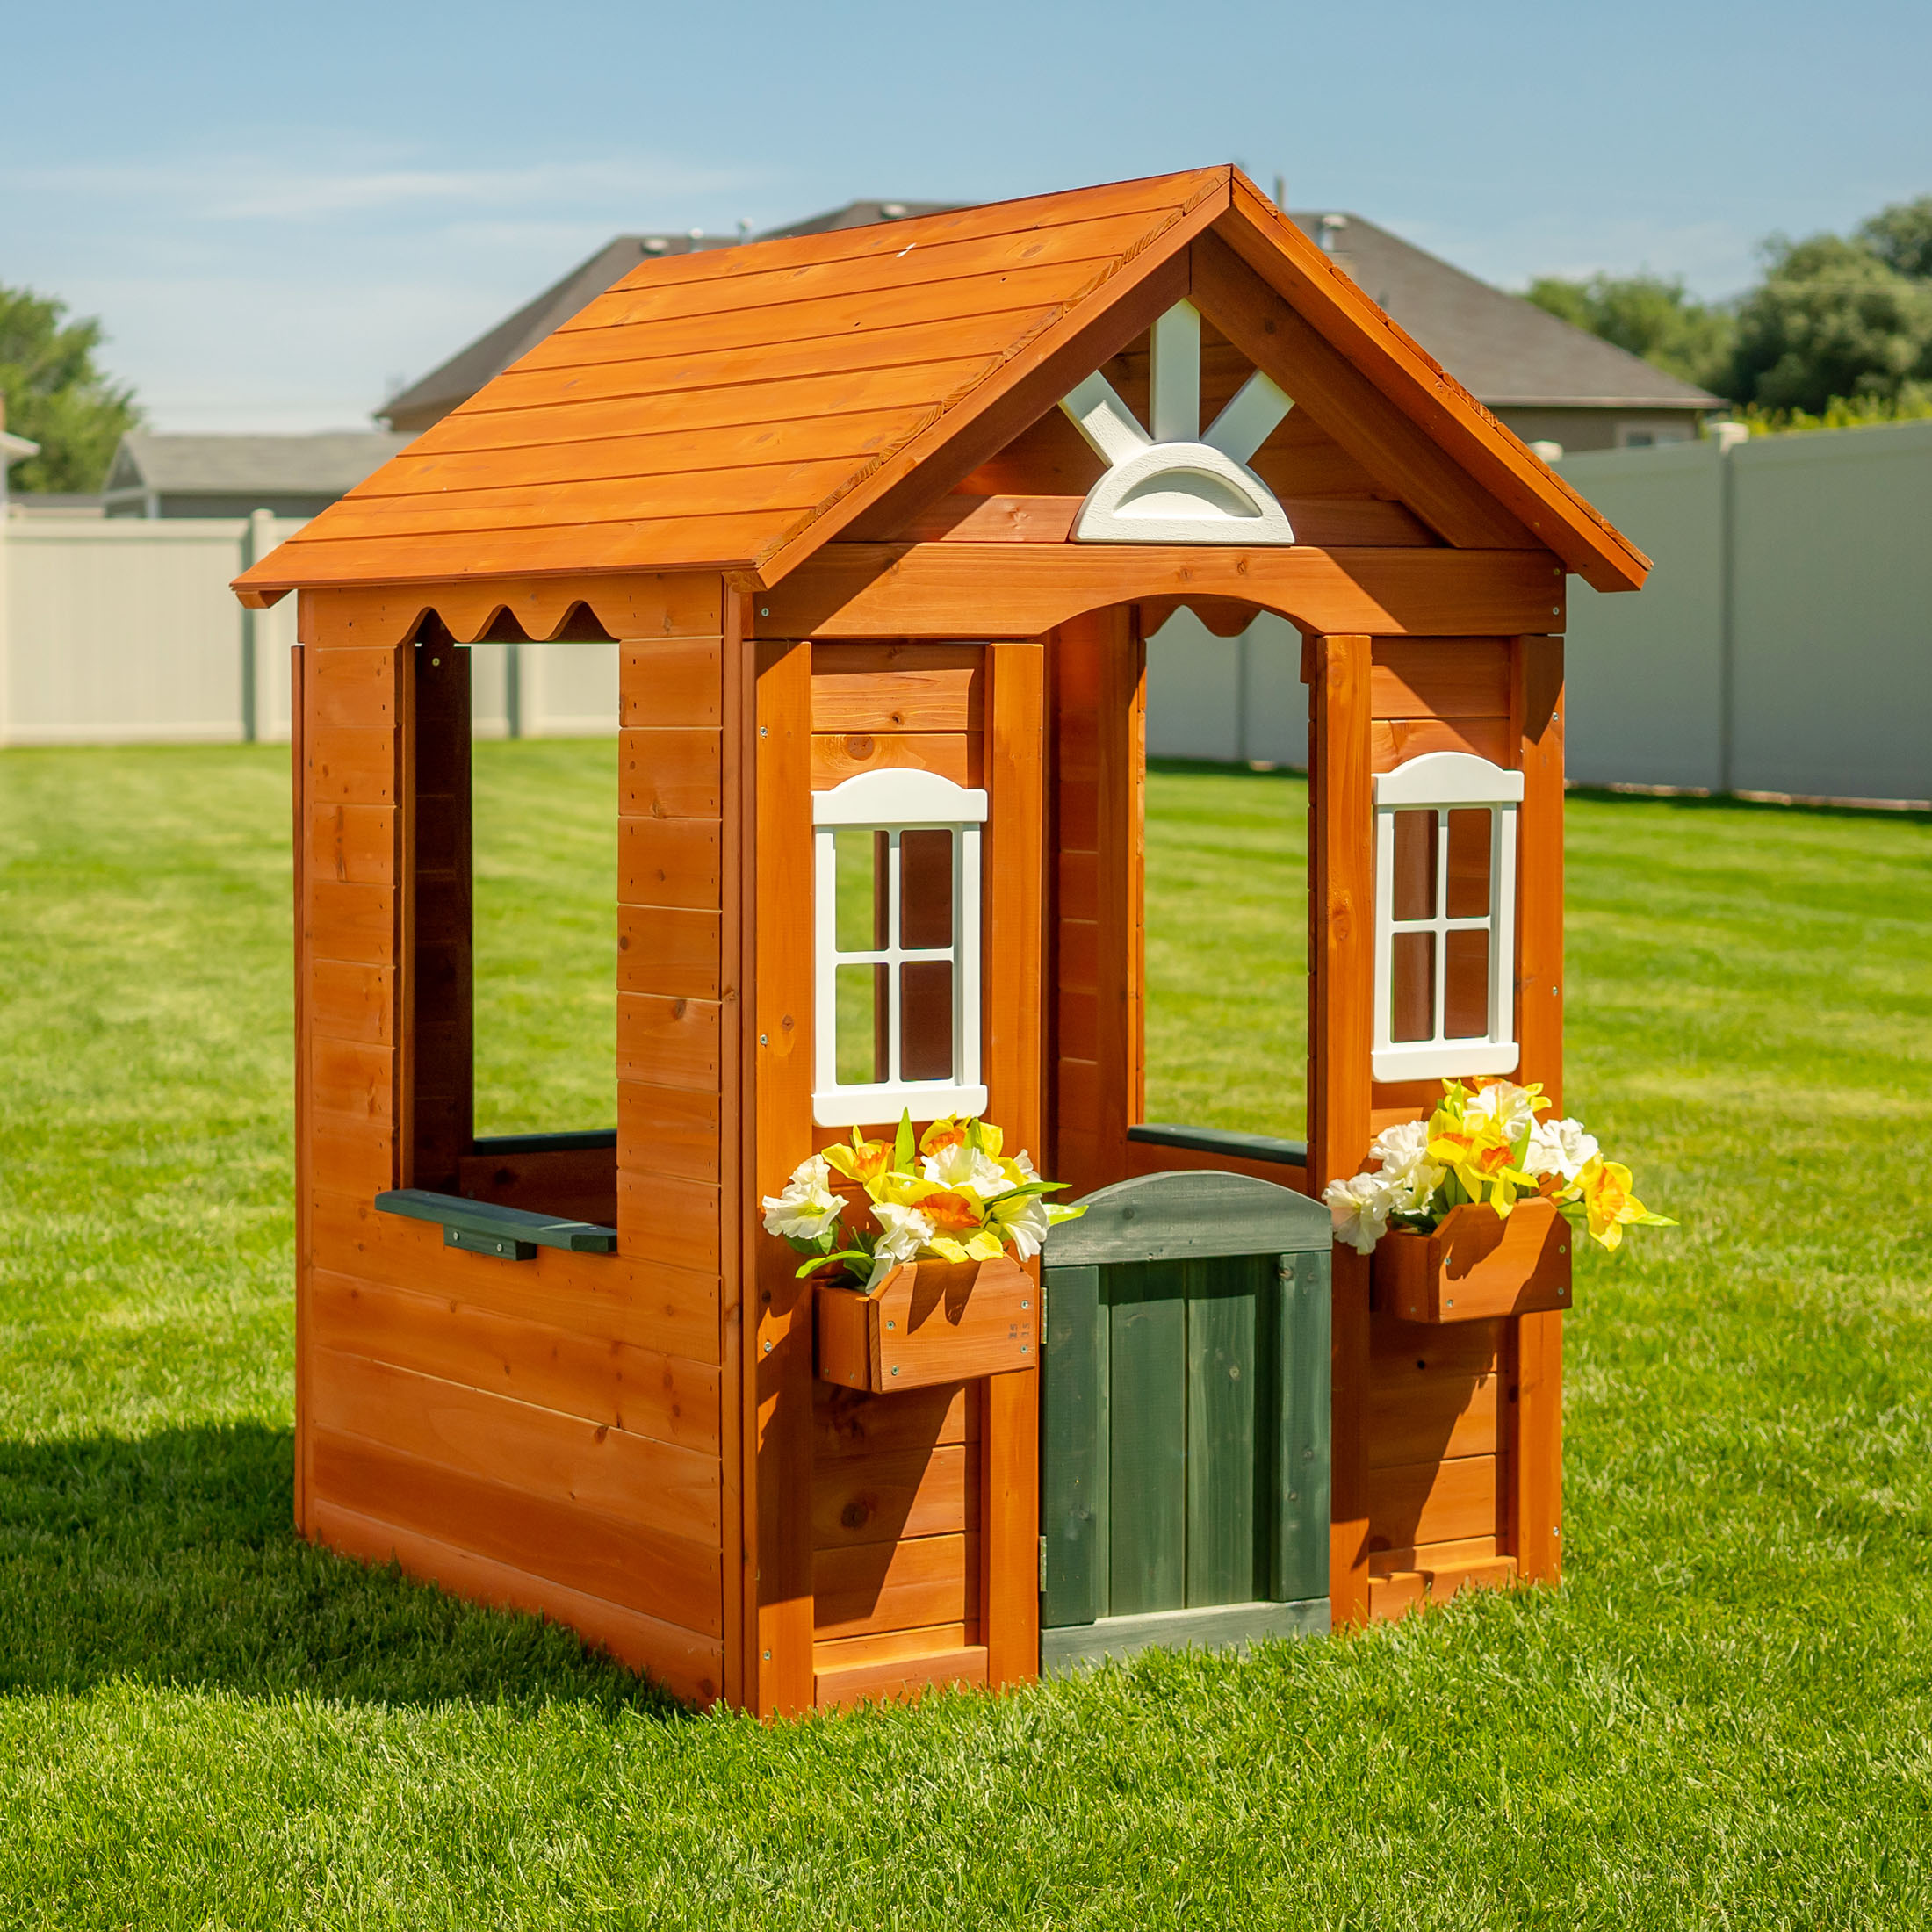 Sportspower Bellevue Kids Wooden Playhouse with Fun Colored Working Front Door, White Trim Windows, and Flower Pot Holders - image 3 of 13